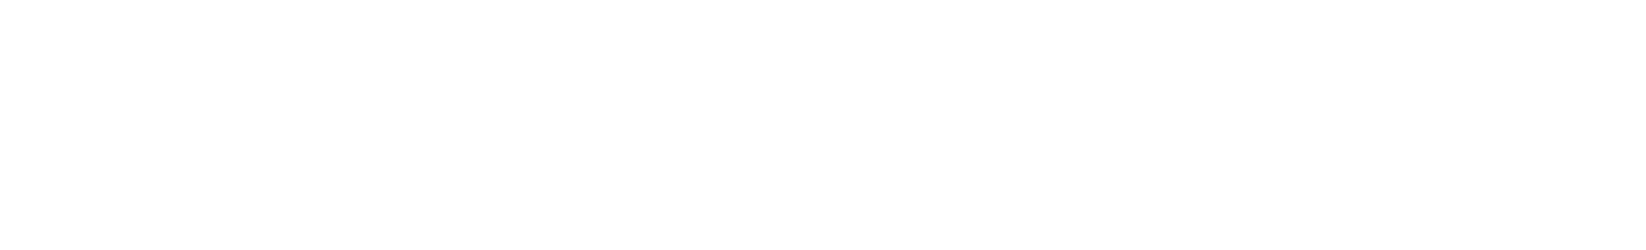 The logo for the Cannabis Research Center at UC Berkeley